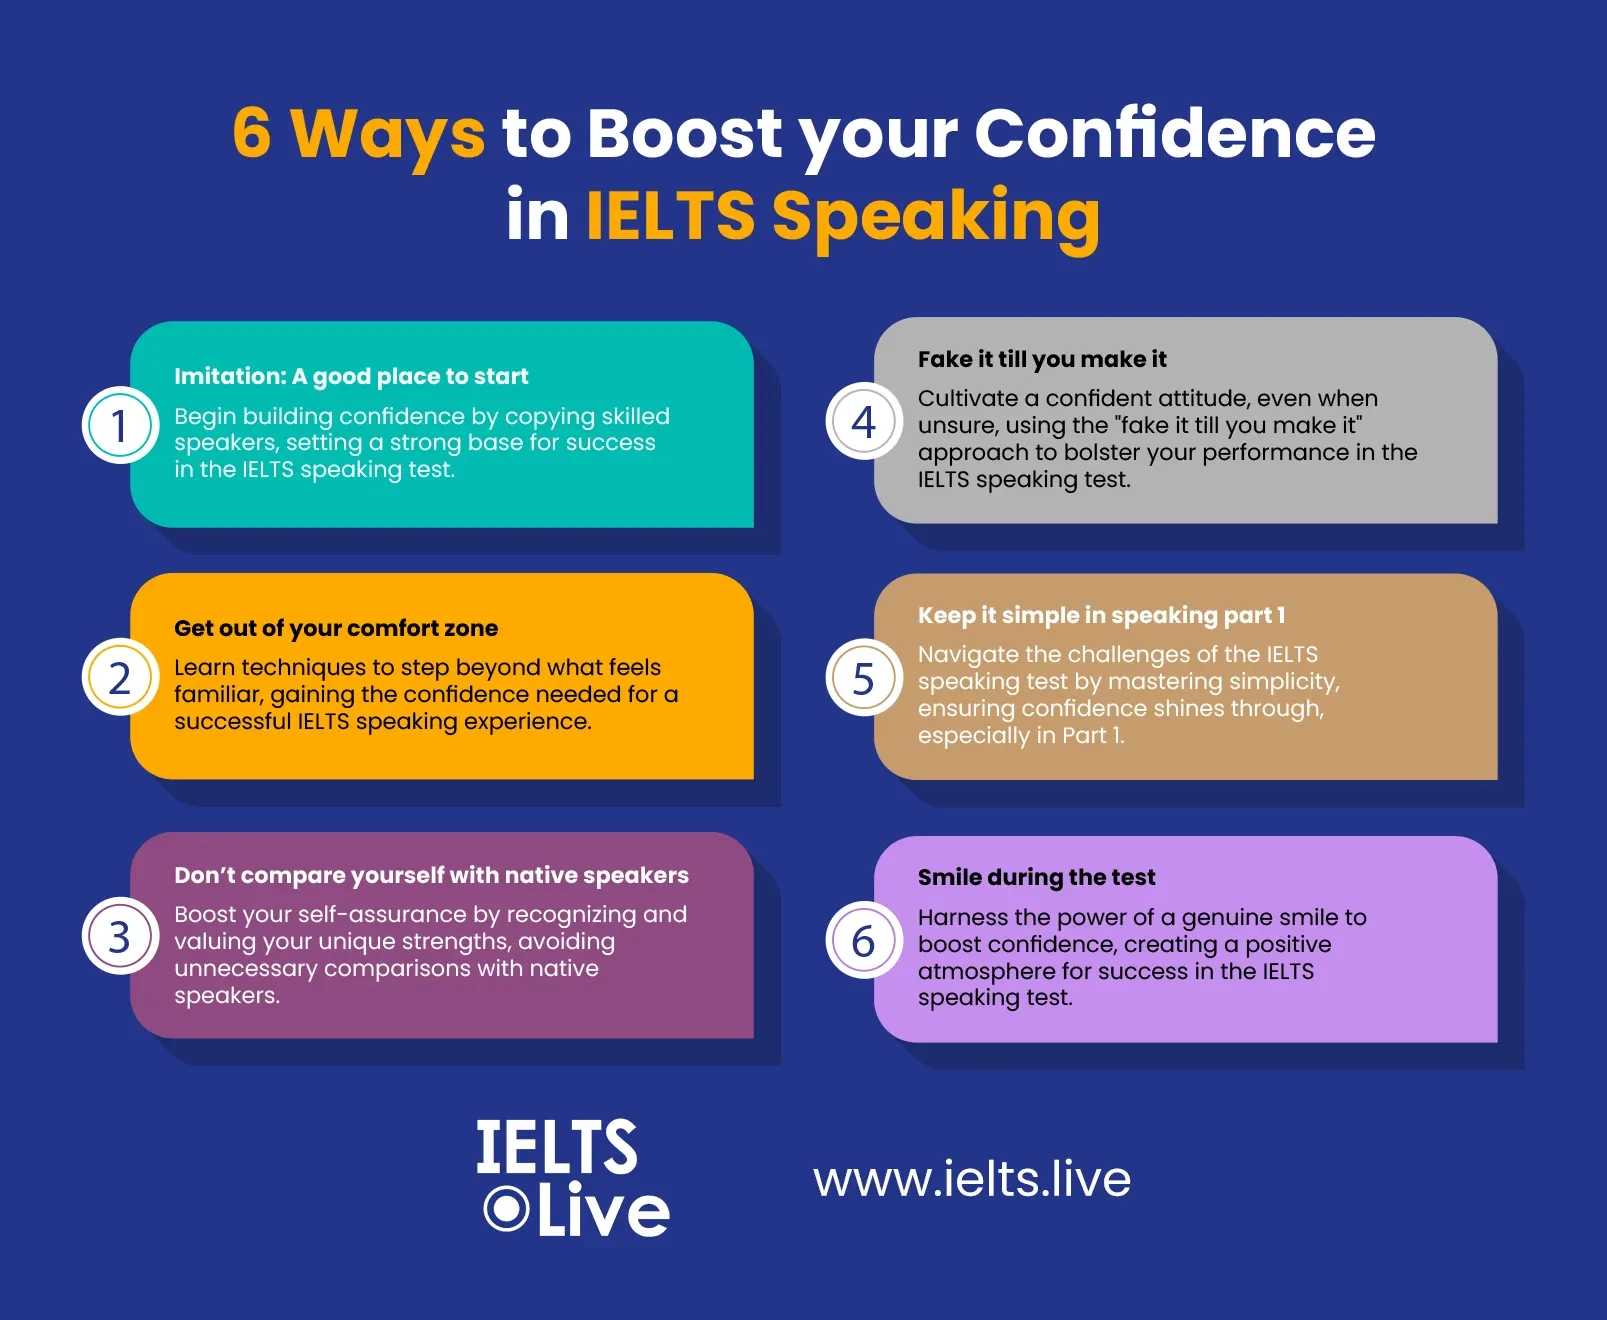 6 Ways to Boost your Confidence in IELTS Speaking